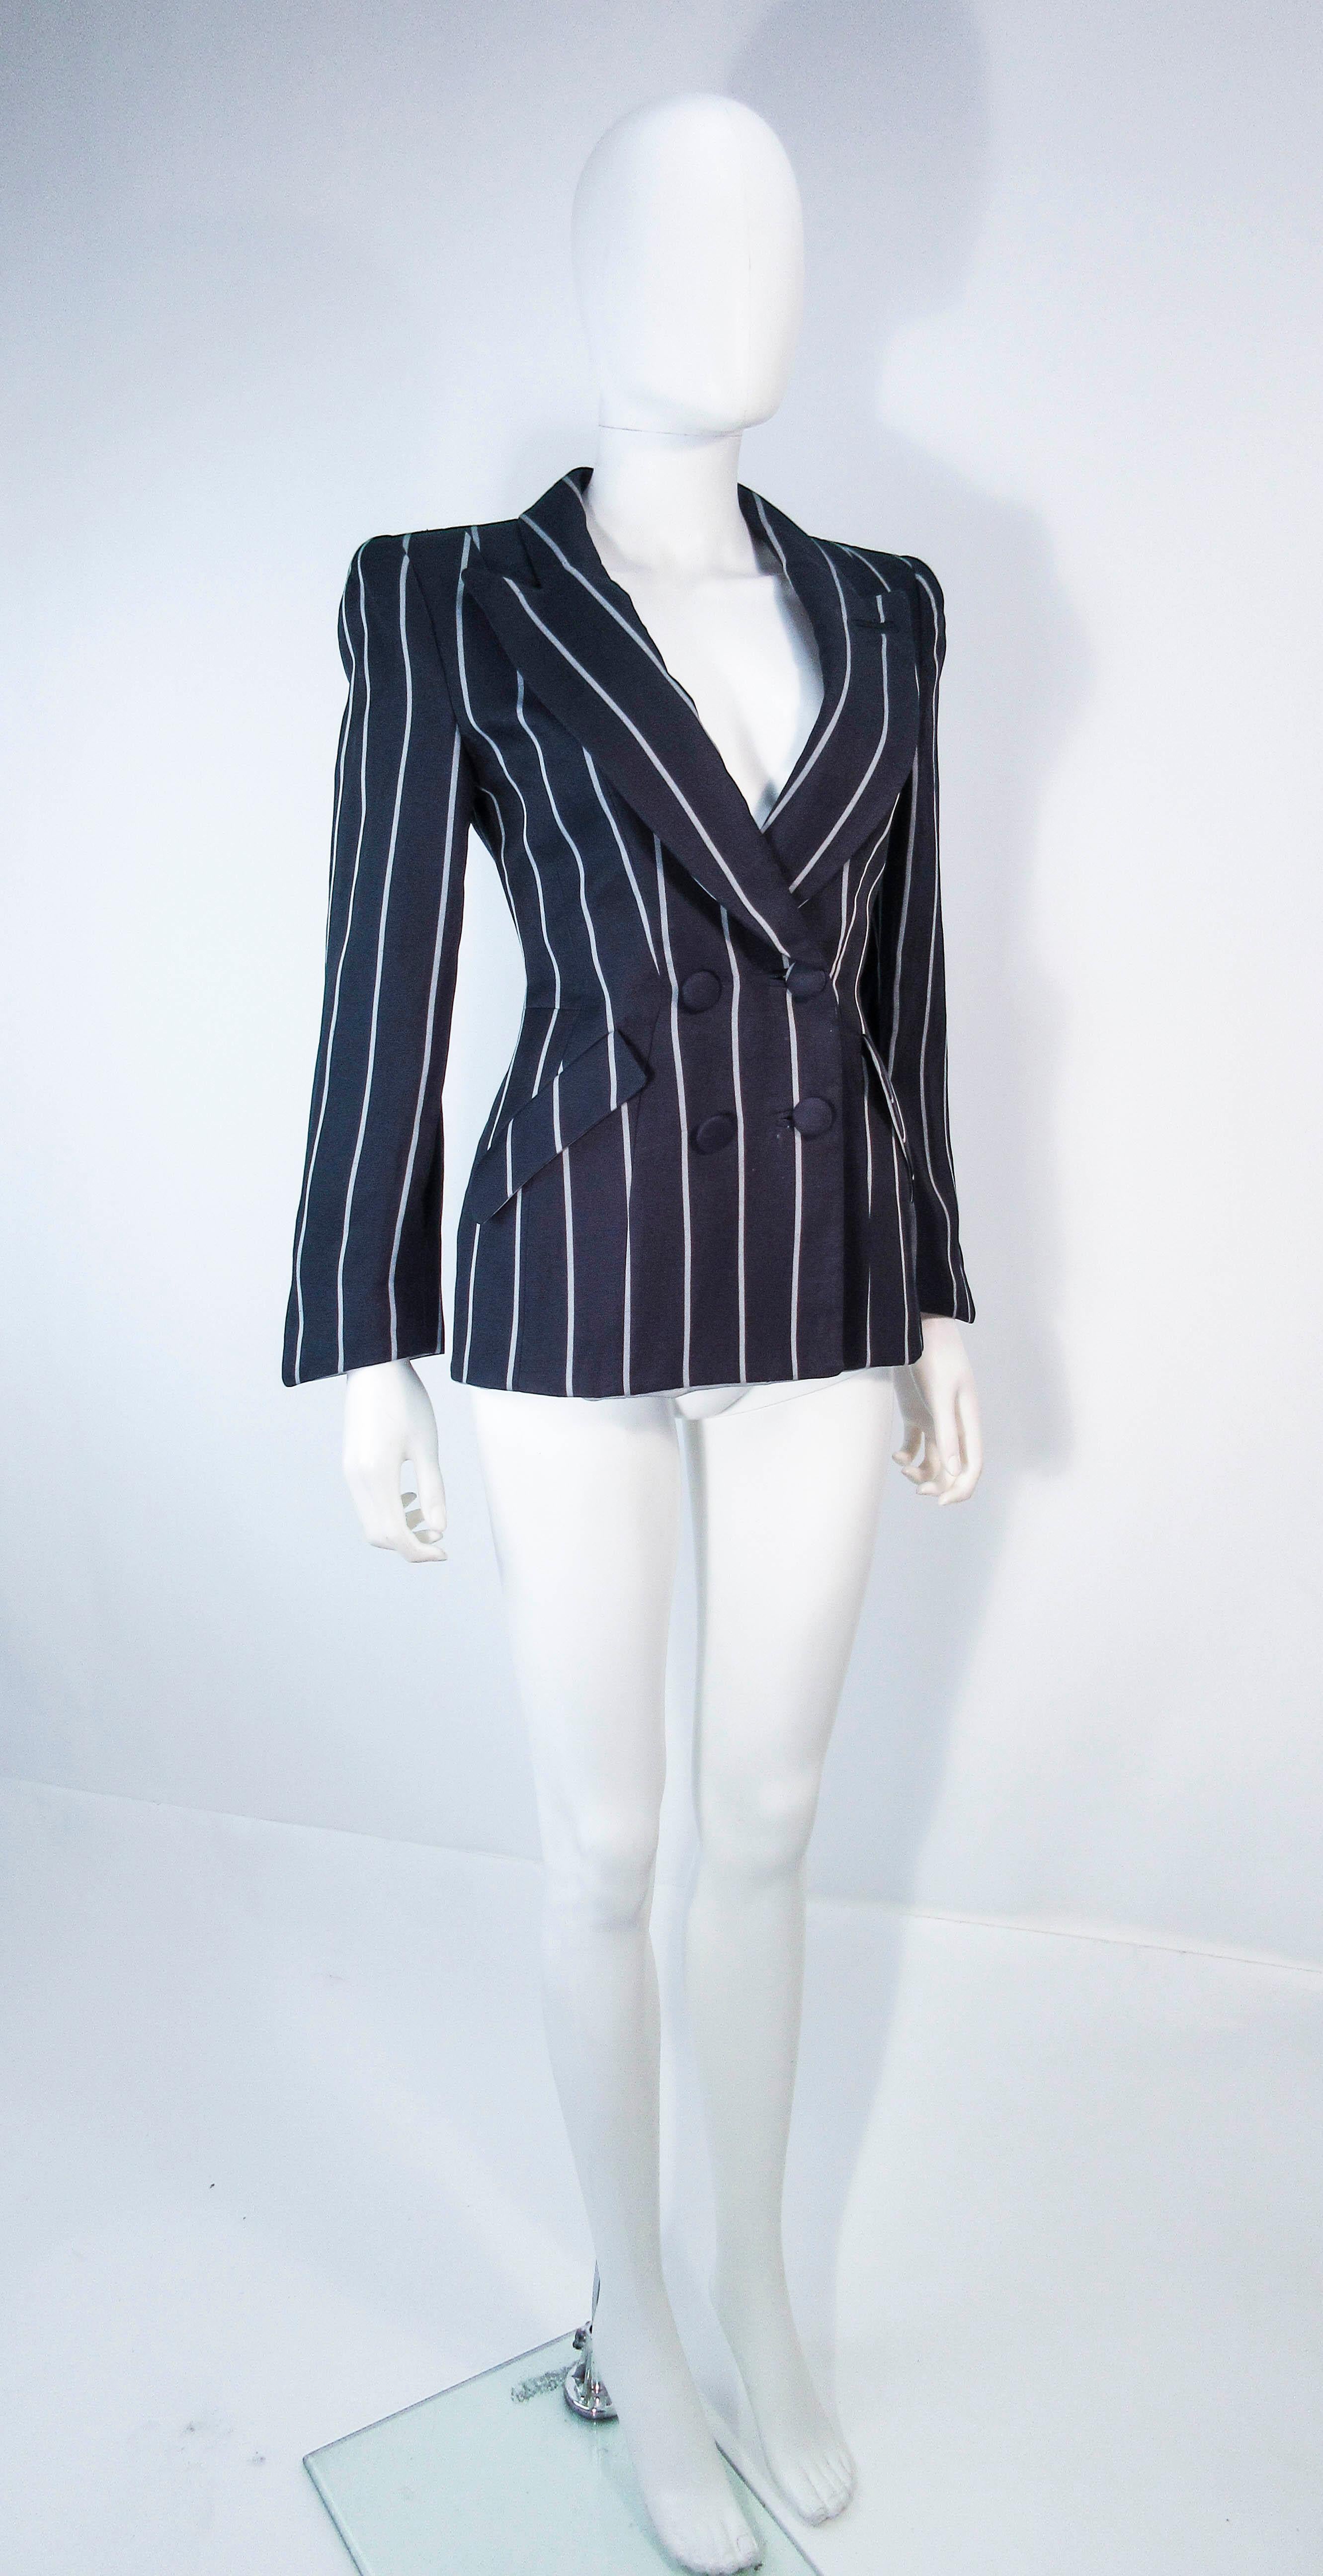 Women's GIORGIO ARMANI Navy Striped Double Breasted Tailored Jacket Size 38